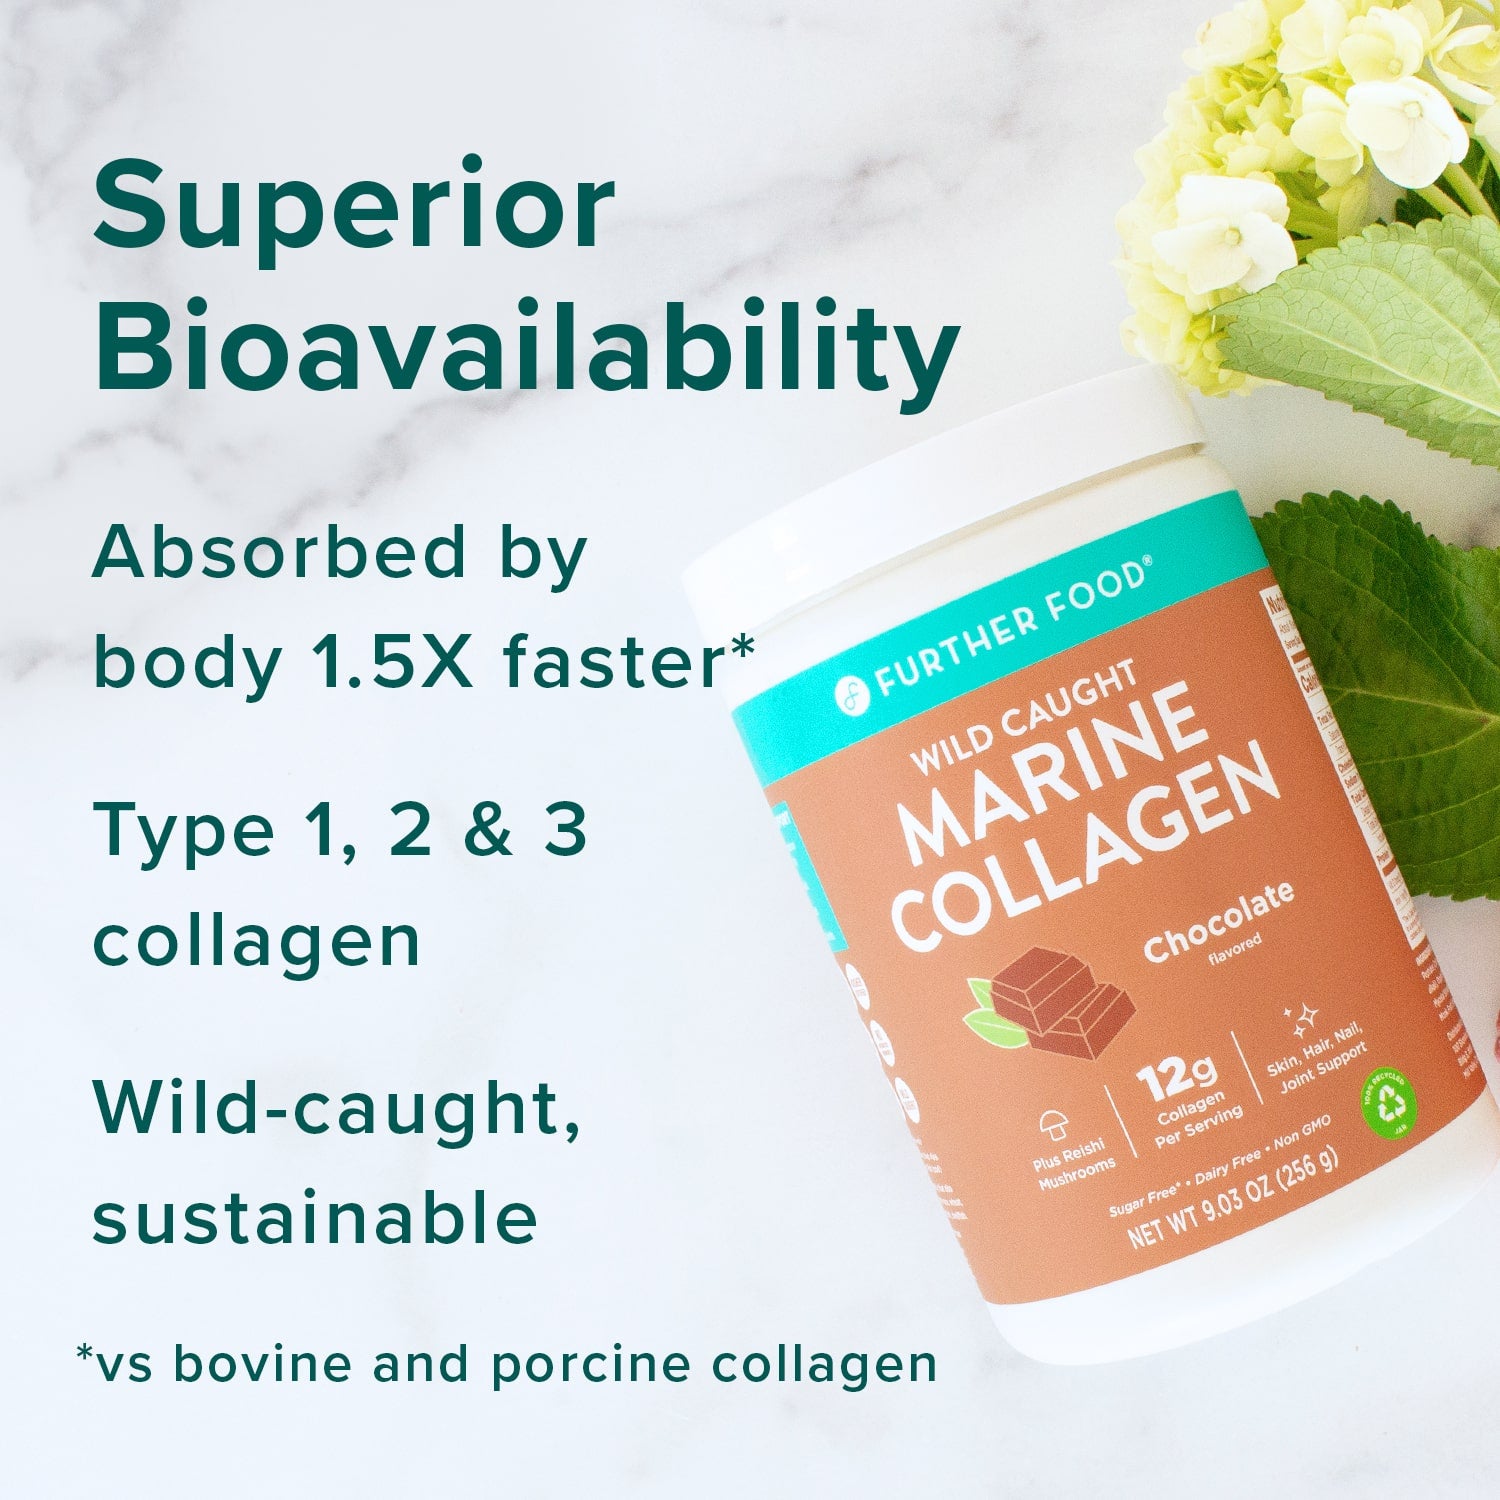 Further Food Chocolate Marine Collagen Superior Bioavailability. Absorbed by body 1.5x faster, has Type 1, 2 and 3 collagen, and is wild-caught and sustainably sourced